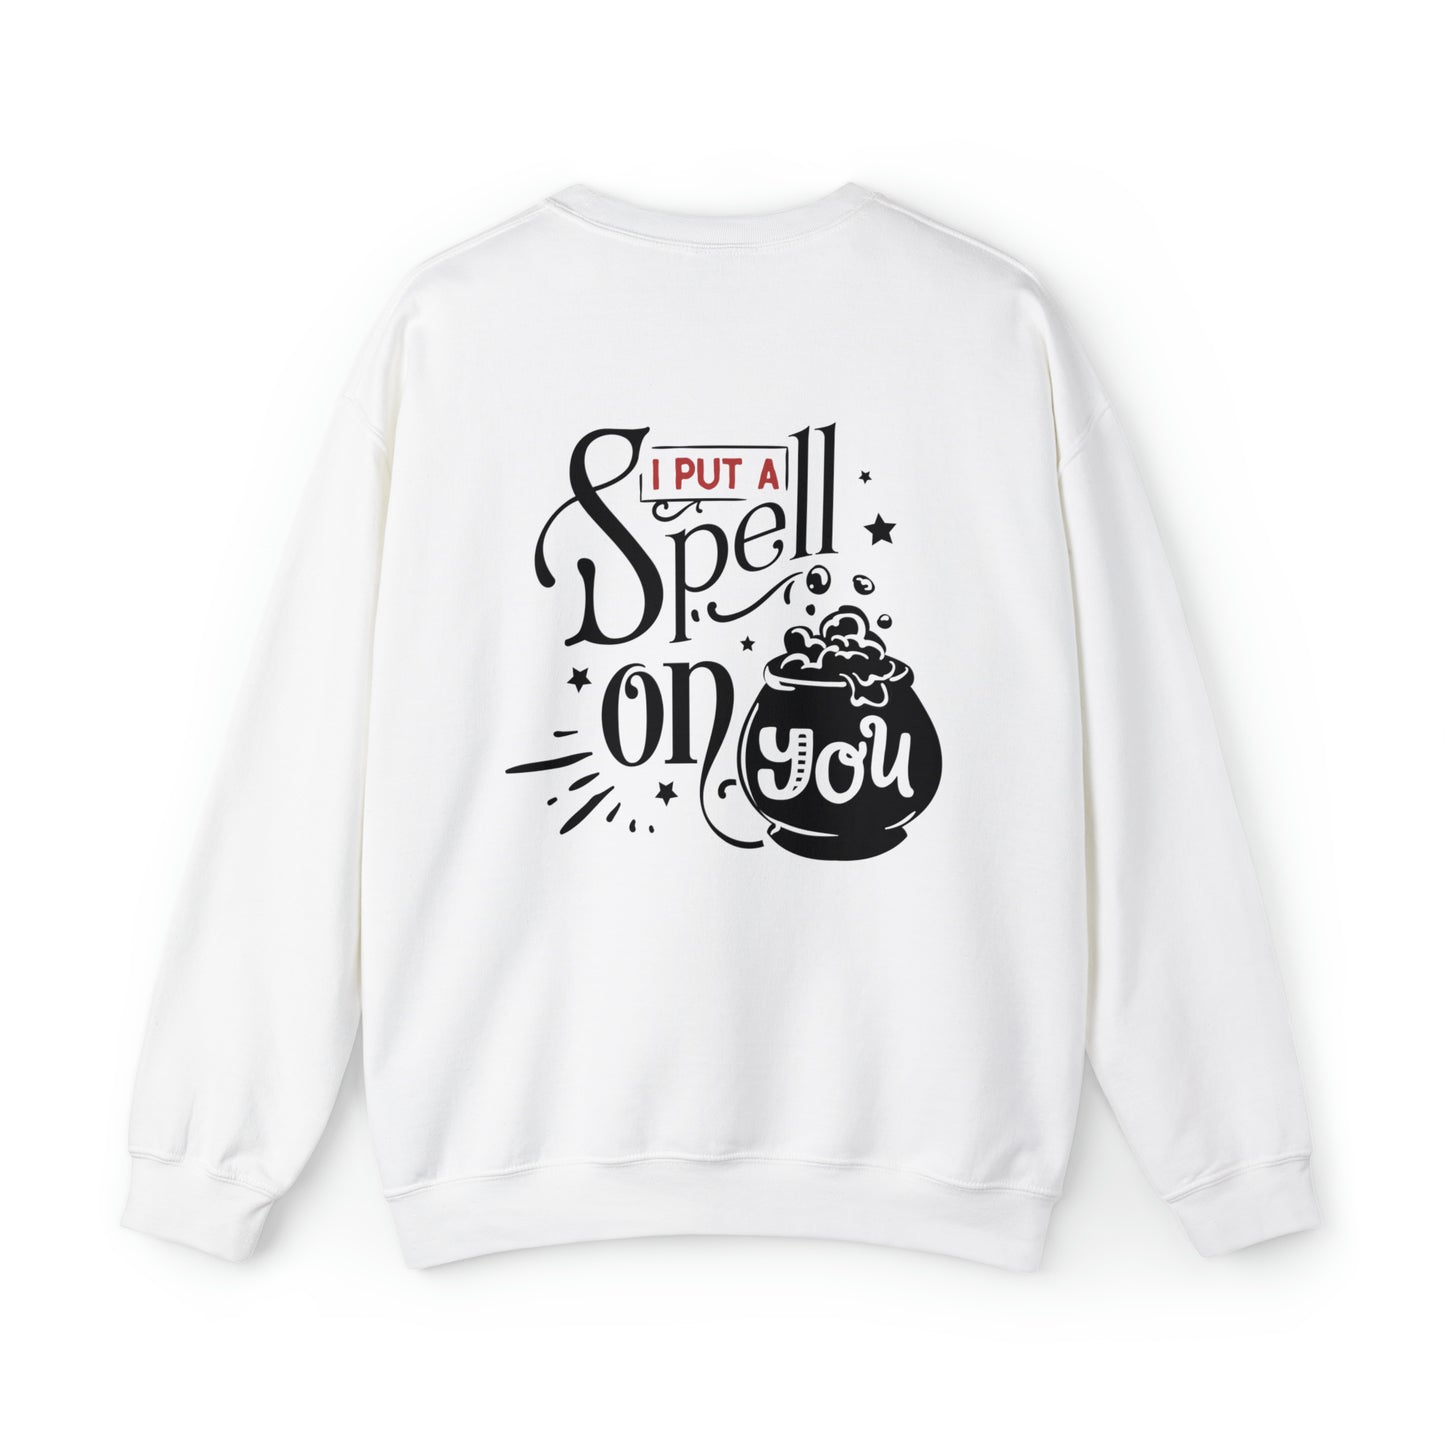 You’re my boo! I Put a Spell on You Sweatshirt